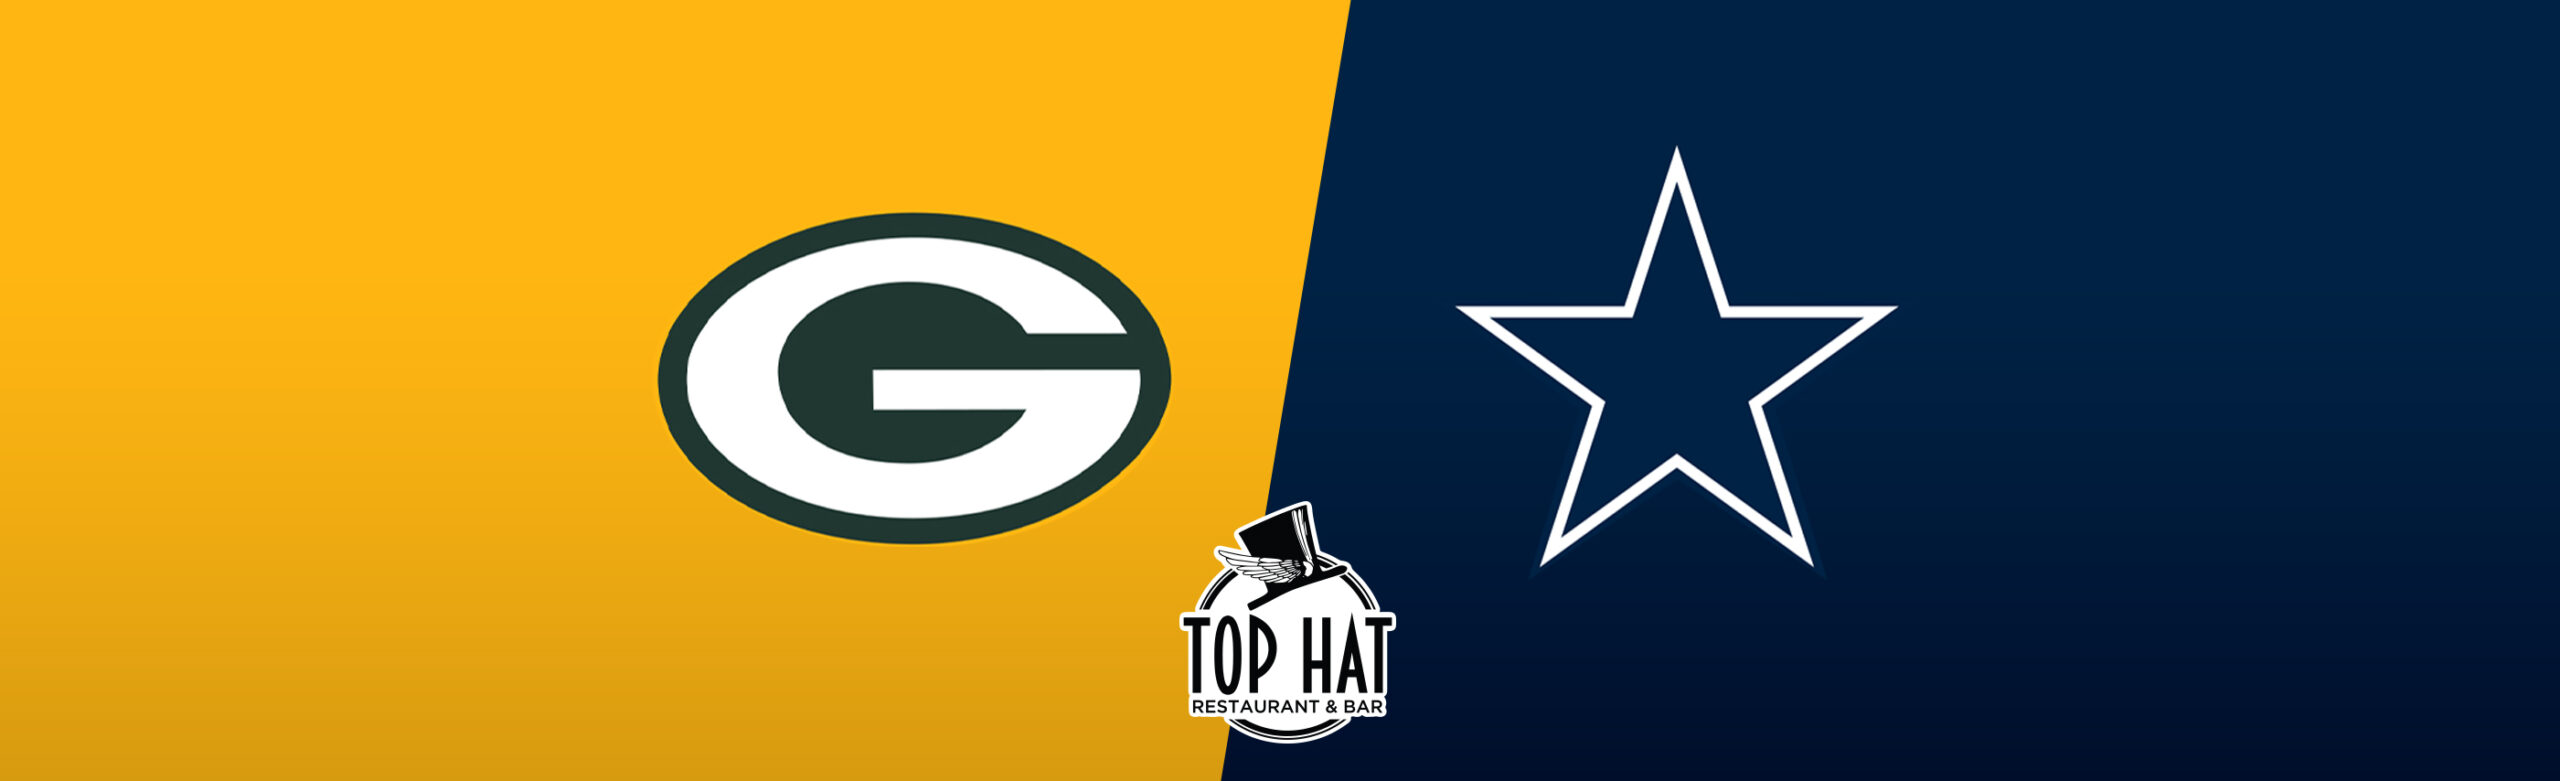 Top Hat Hosts Free Stream of NFC Wildcard Game ft. Green Bay Packers vs. Dallas Cowboys Image